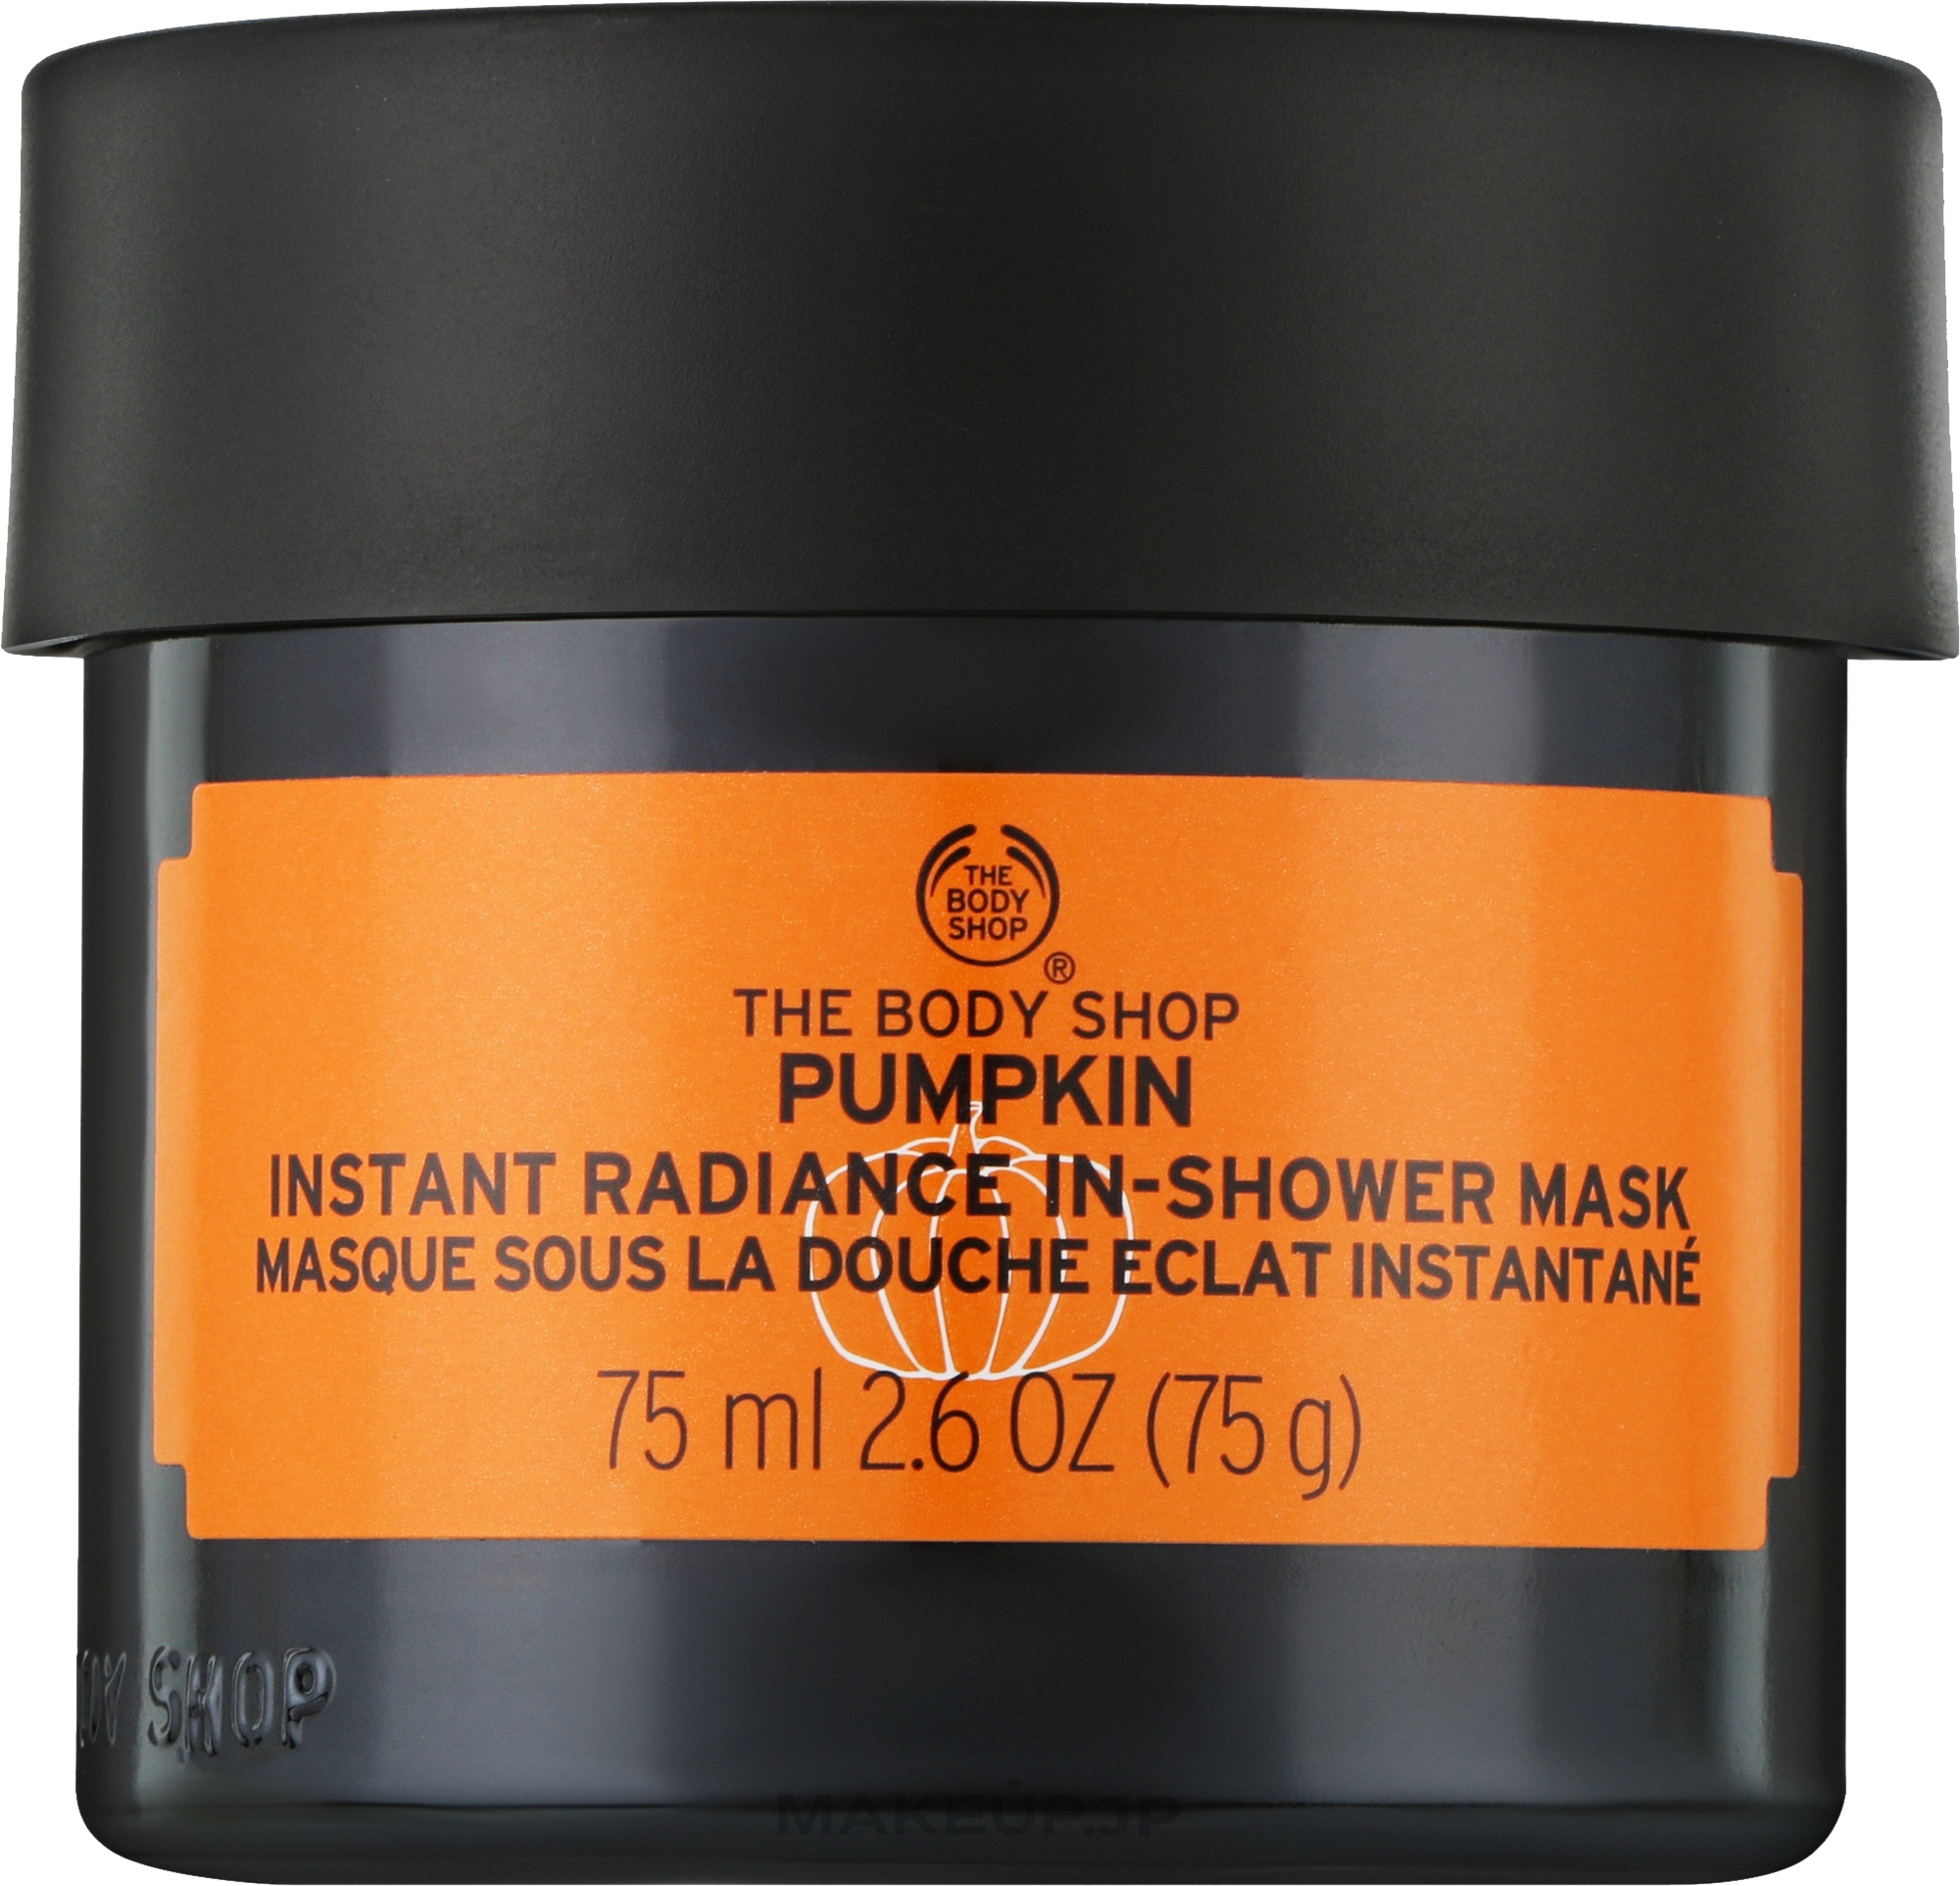 Instant Radiance Face Mask 'Pumpkin' - The Body Shop Pumpkin Instant Radiance In-Shower Mask — photo 75 ml